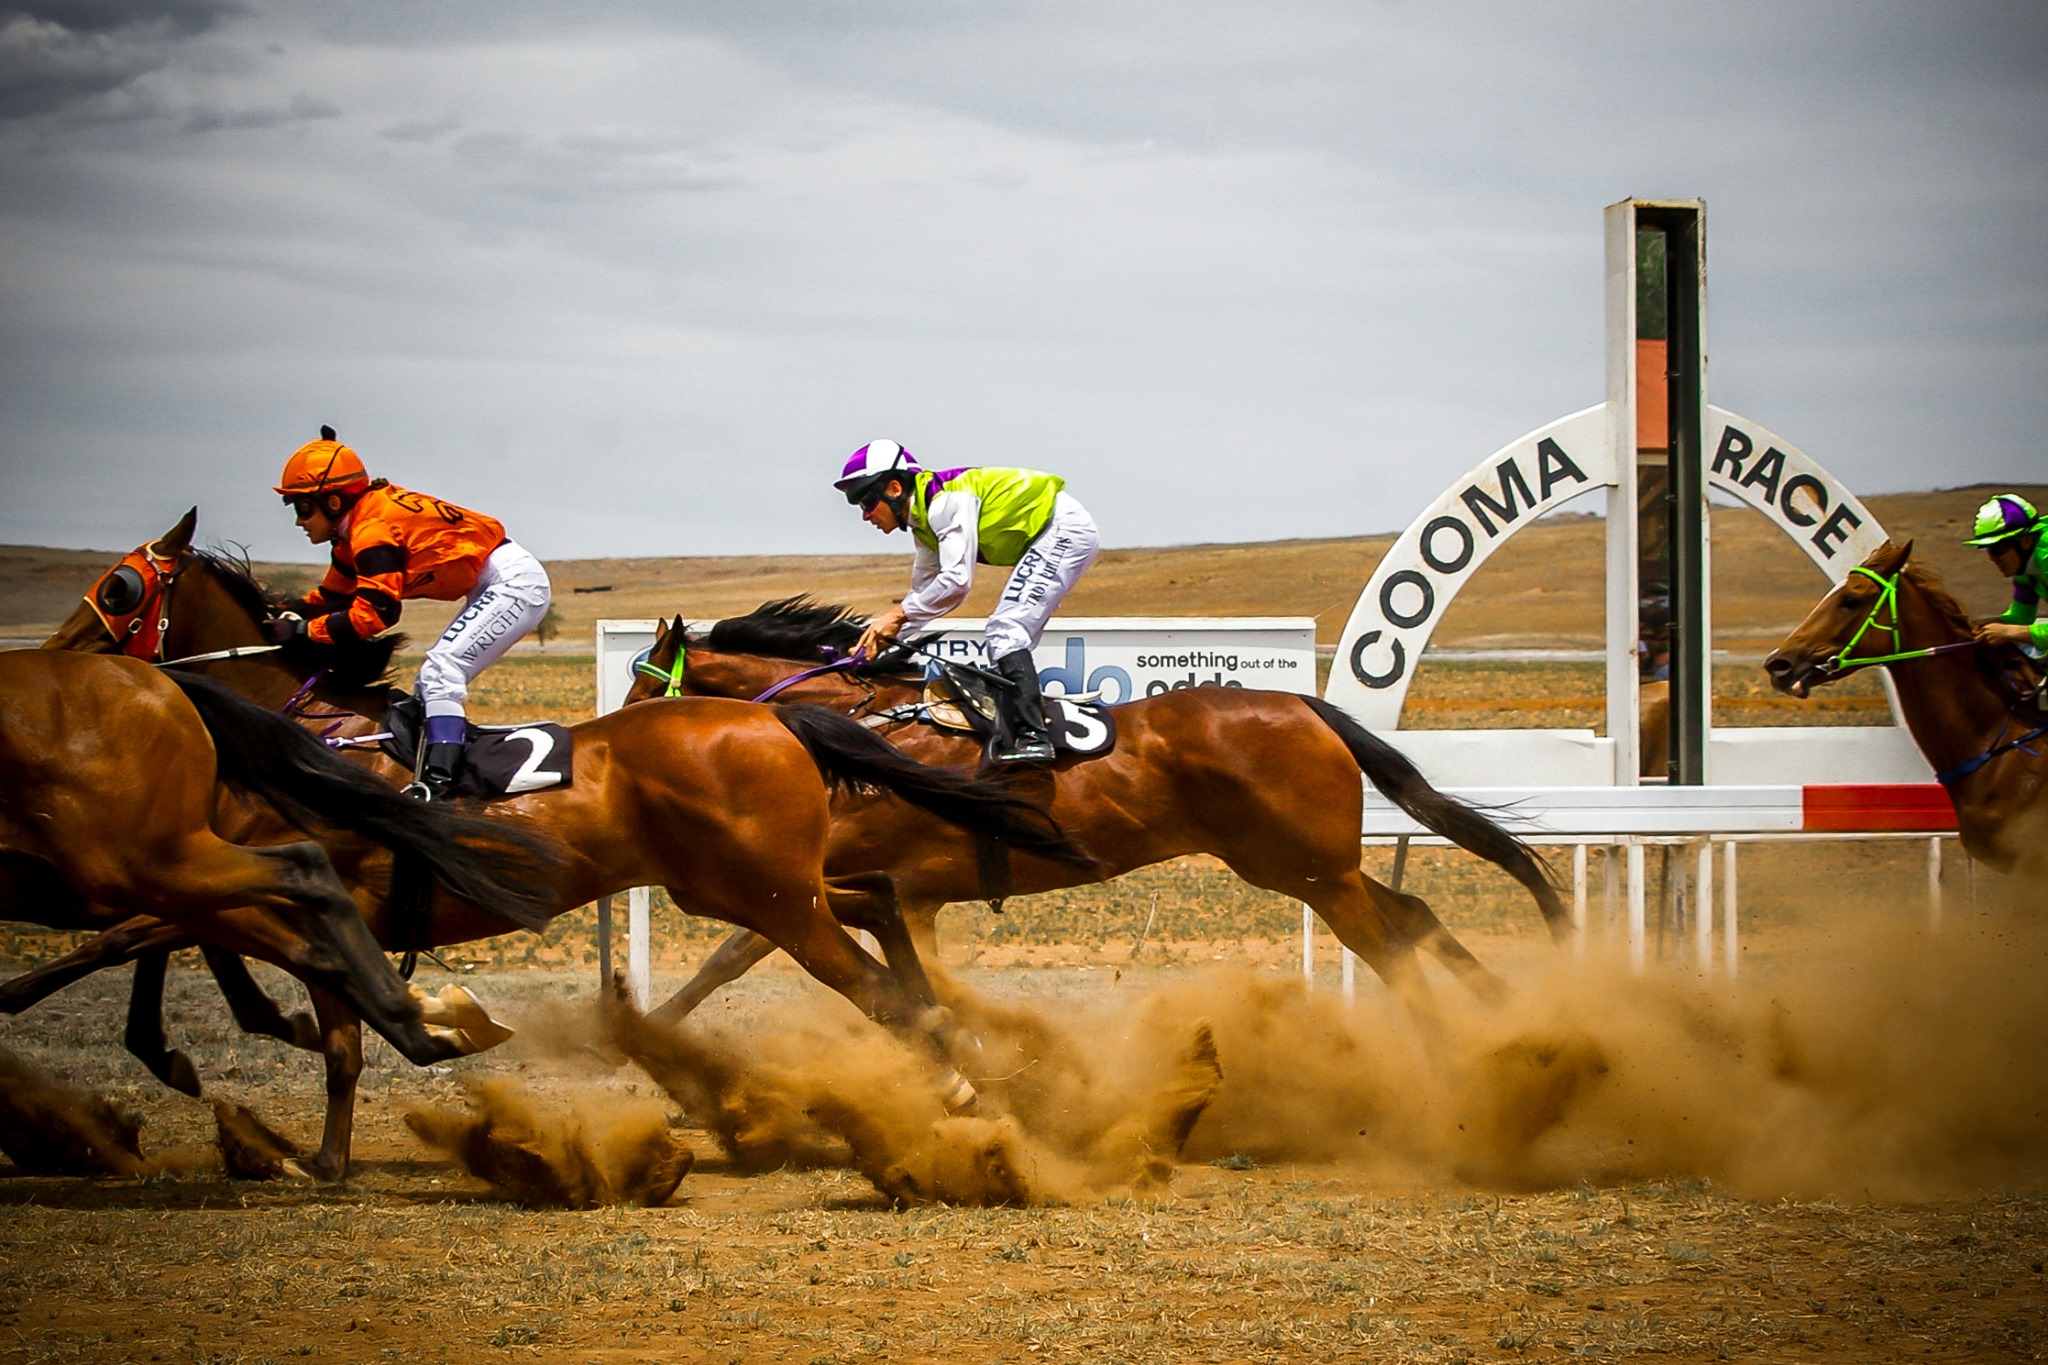 Cooma Monaro Race Club receives almost $110k in government funding for new racecourse sheds